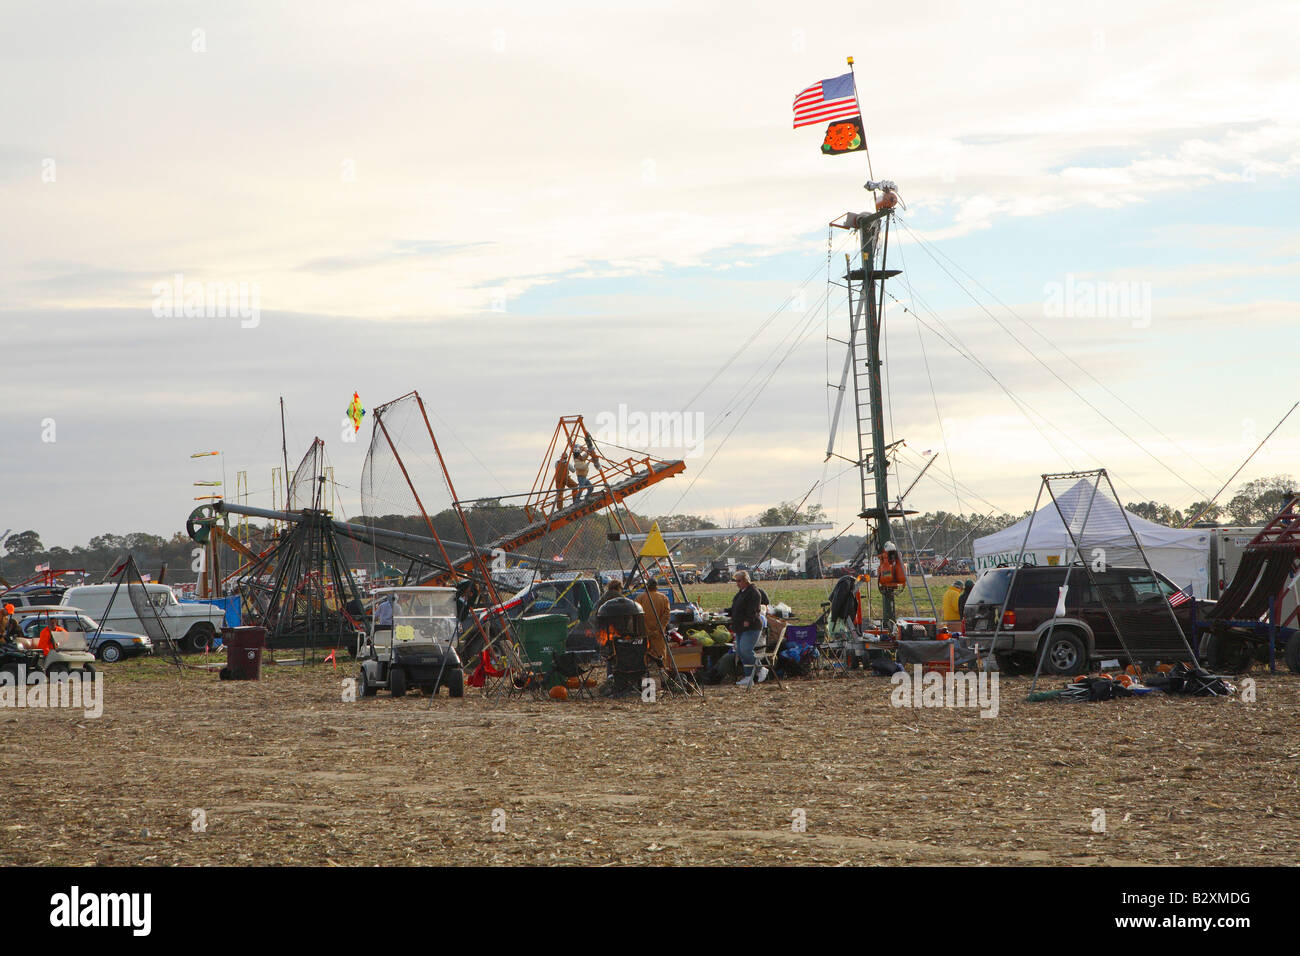 Group of pumpkin flinging machines with large catapult in foreground (Fibonacci - world record holder) with others behind Stock Photo